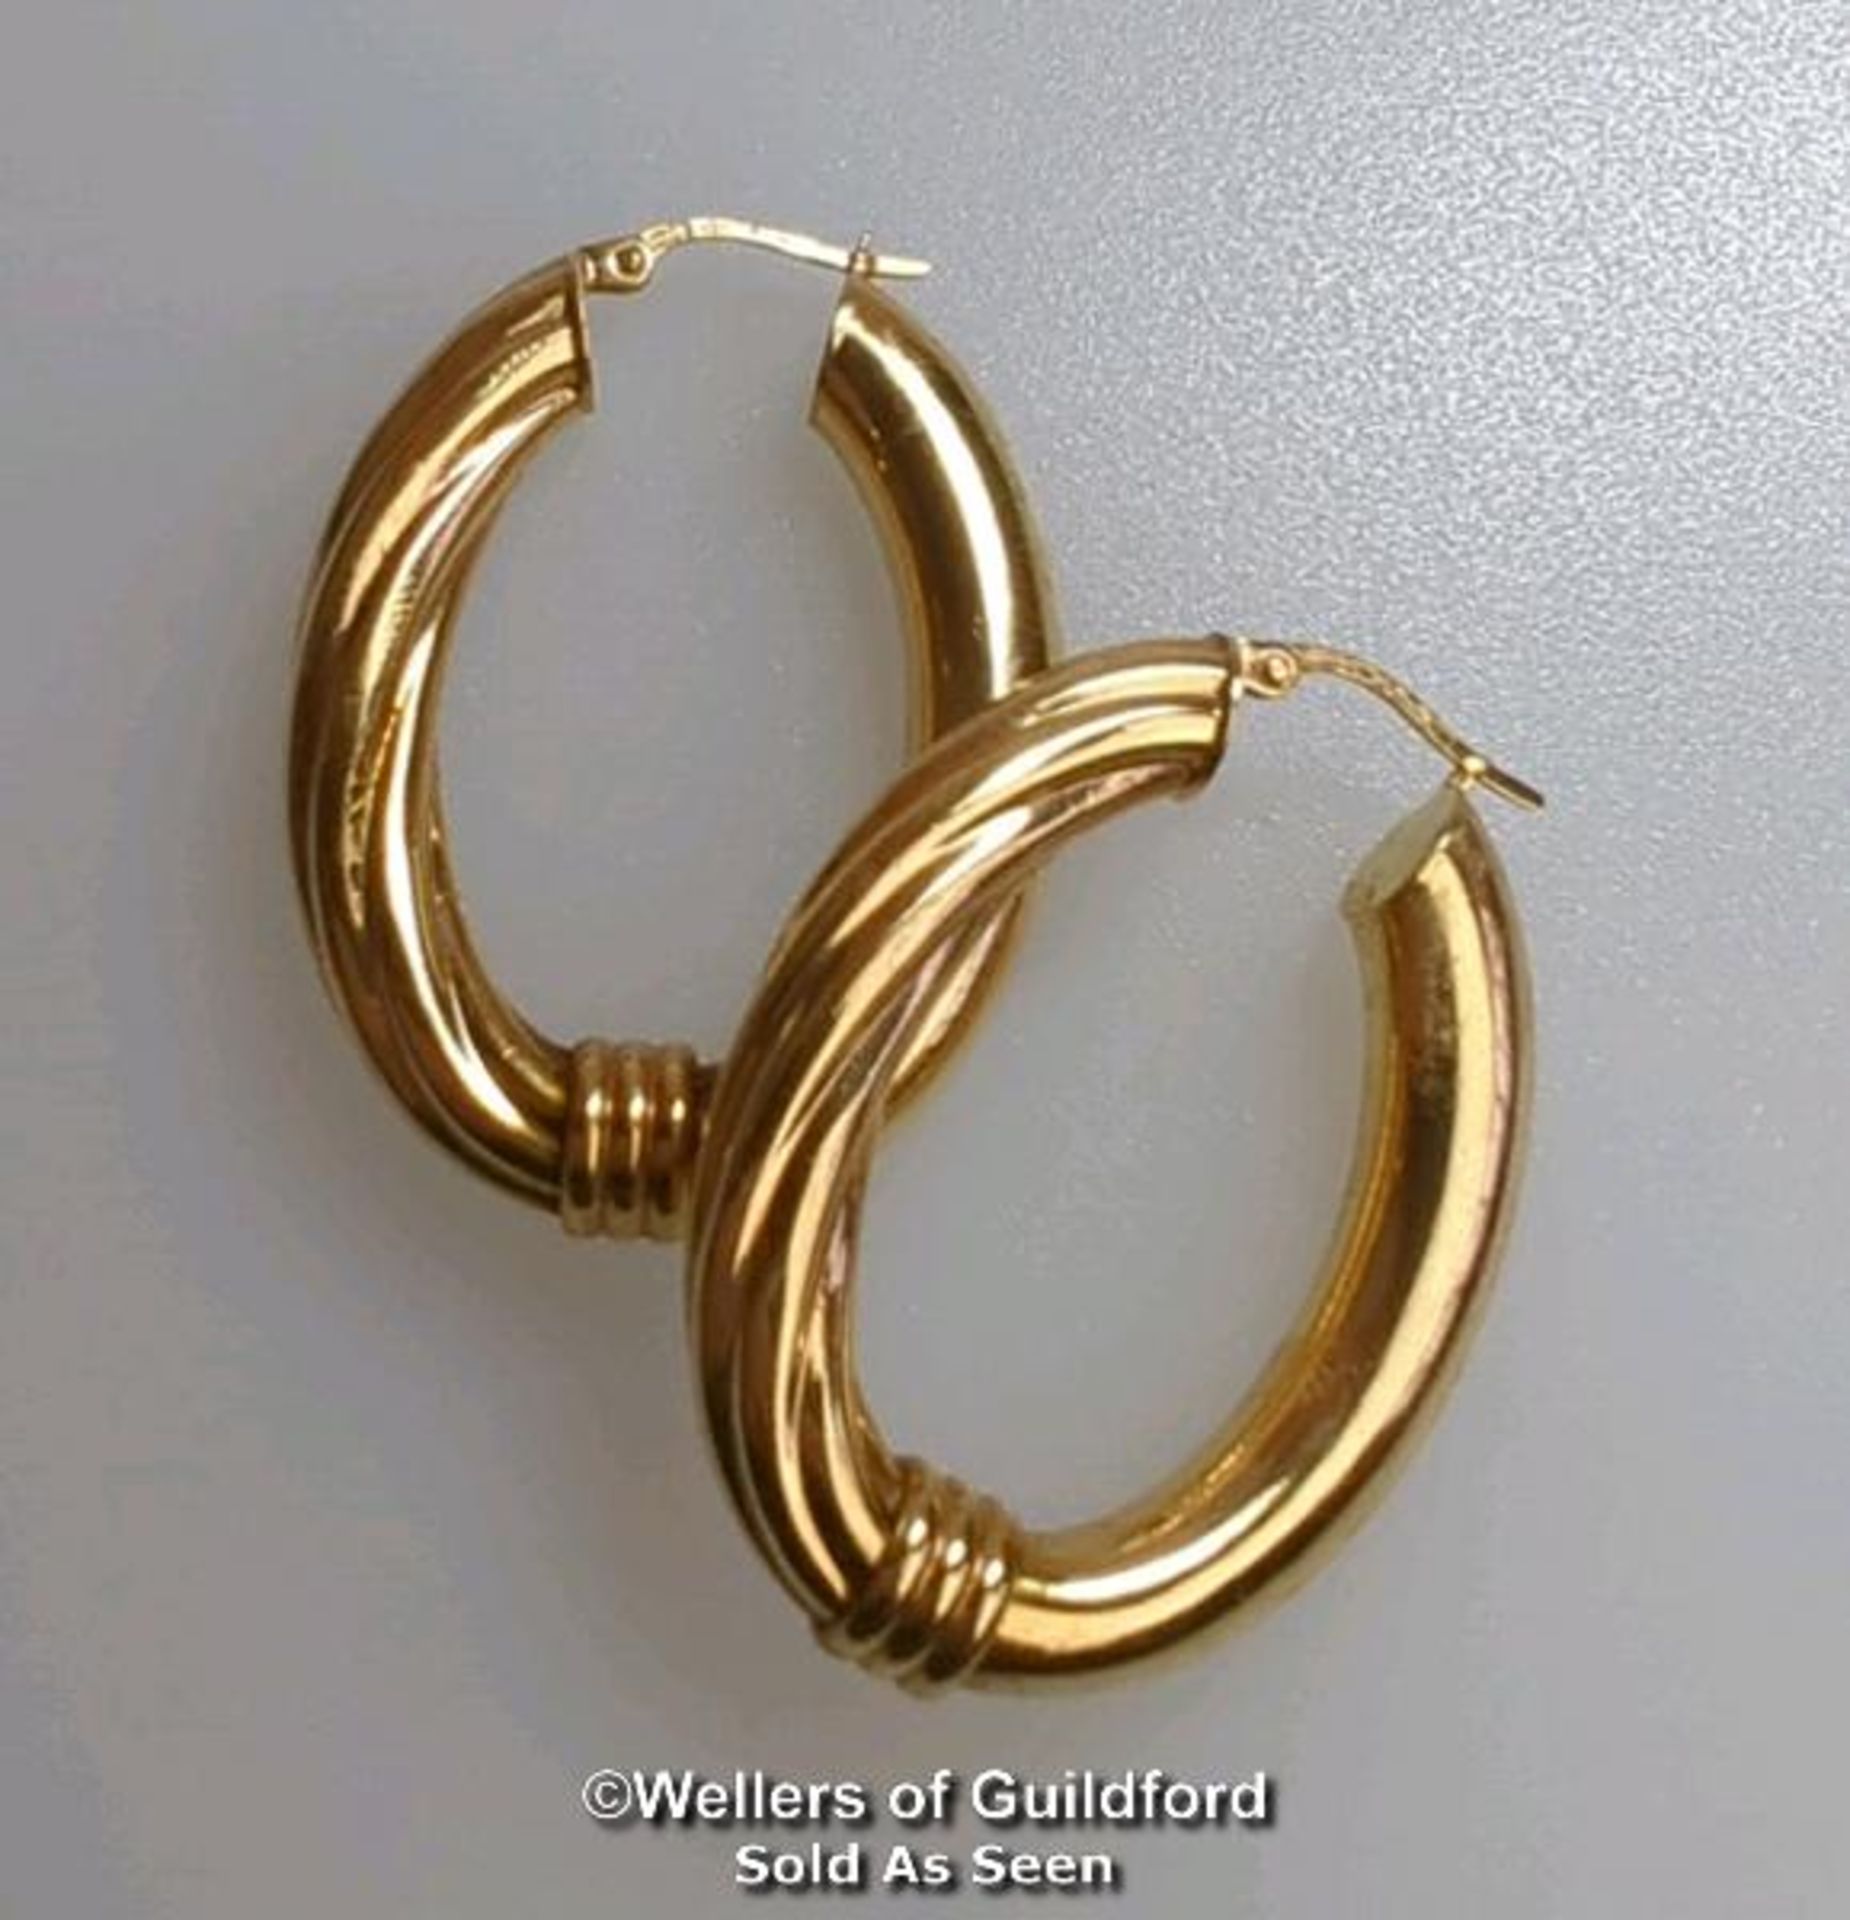 A pair of oval hoop earrings in hallmarked 9ct gold, length 4cm, gross weight 6.83g - Image 4 of 4